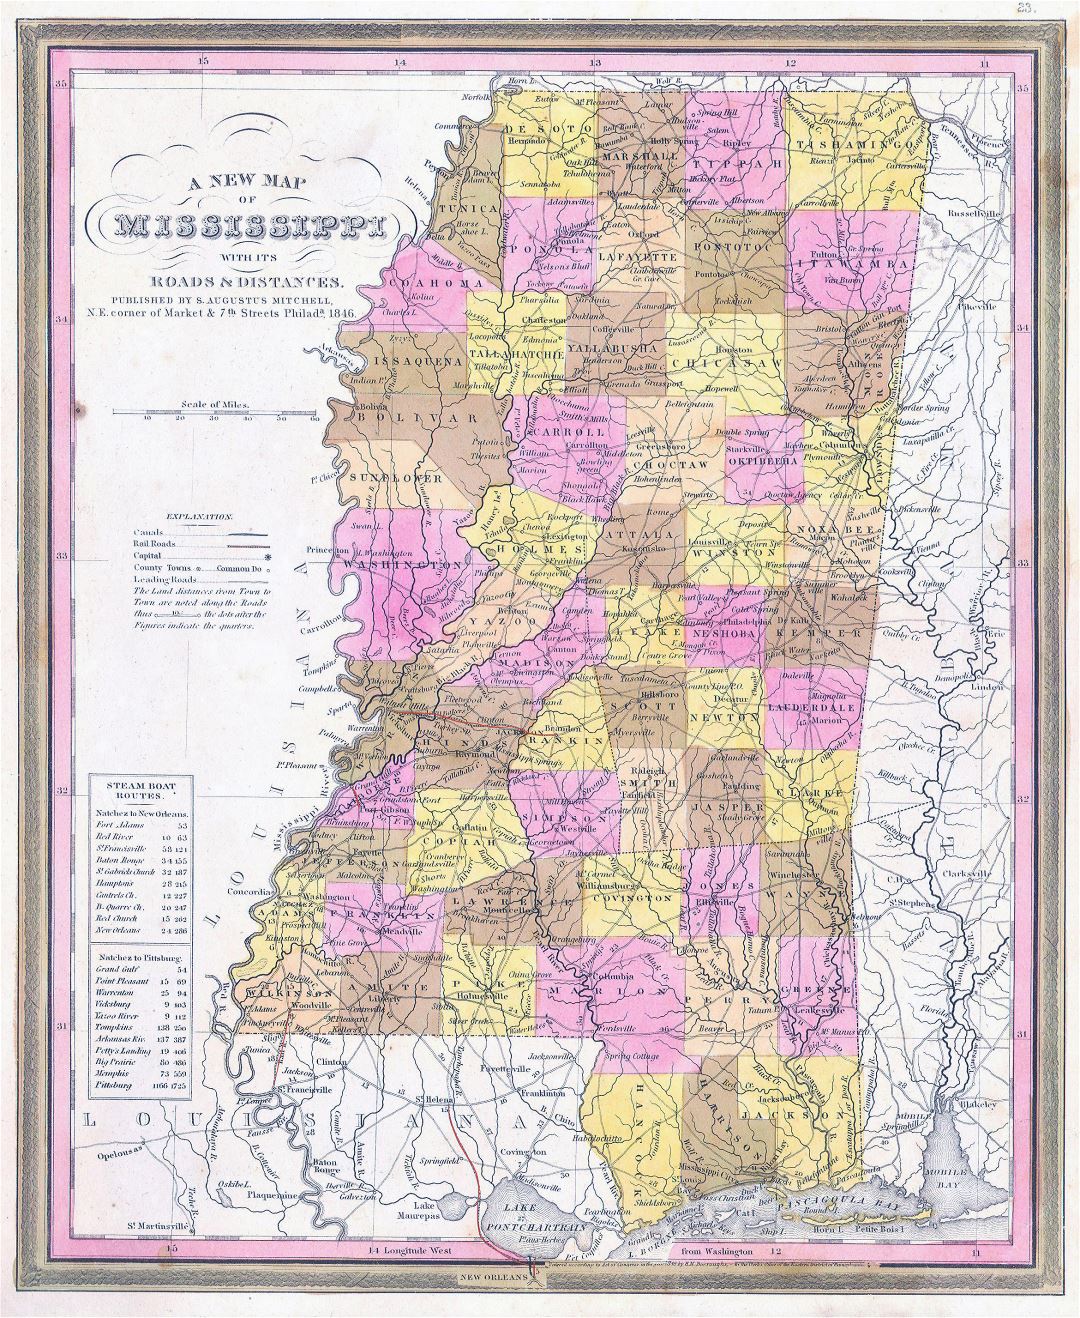 Large detailed old administrative map of Mississippi state with roads, railroads and cities - 1846